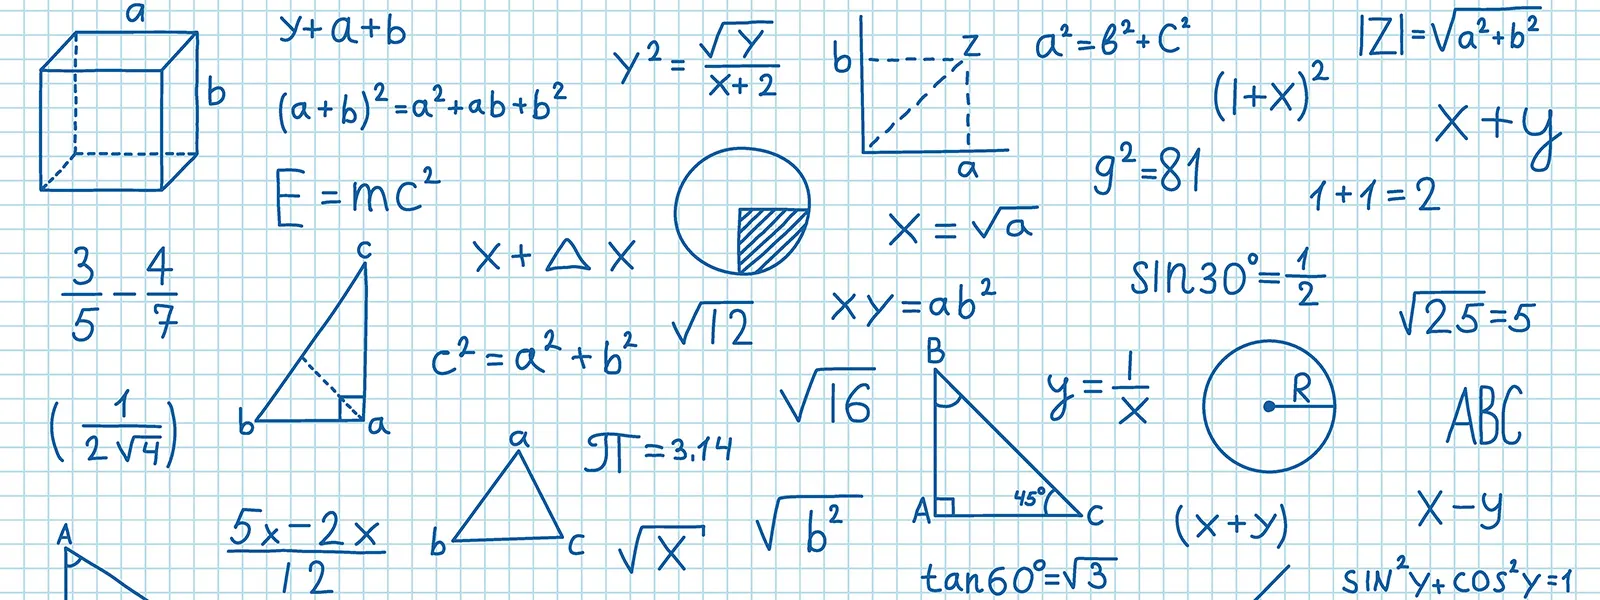 graphic with various equations and mathematics shown.